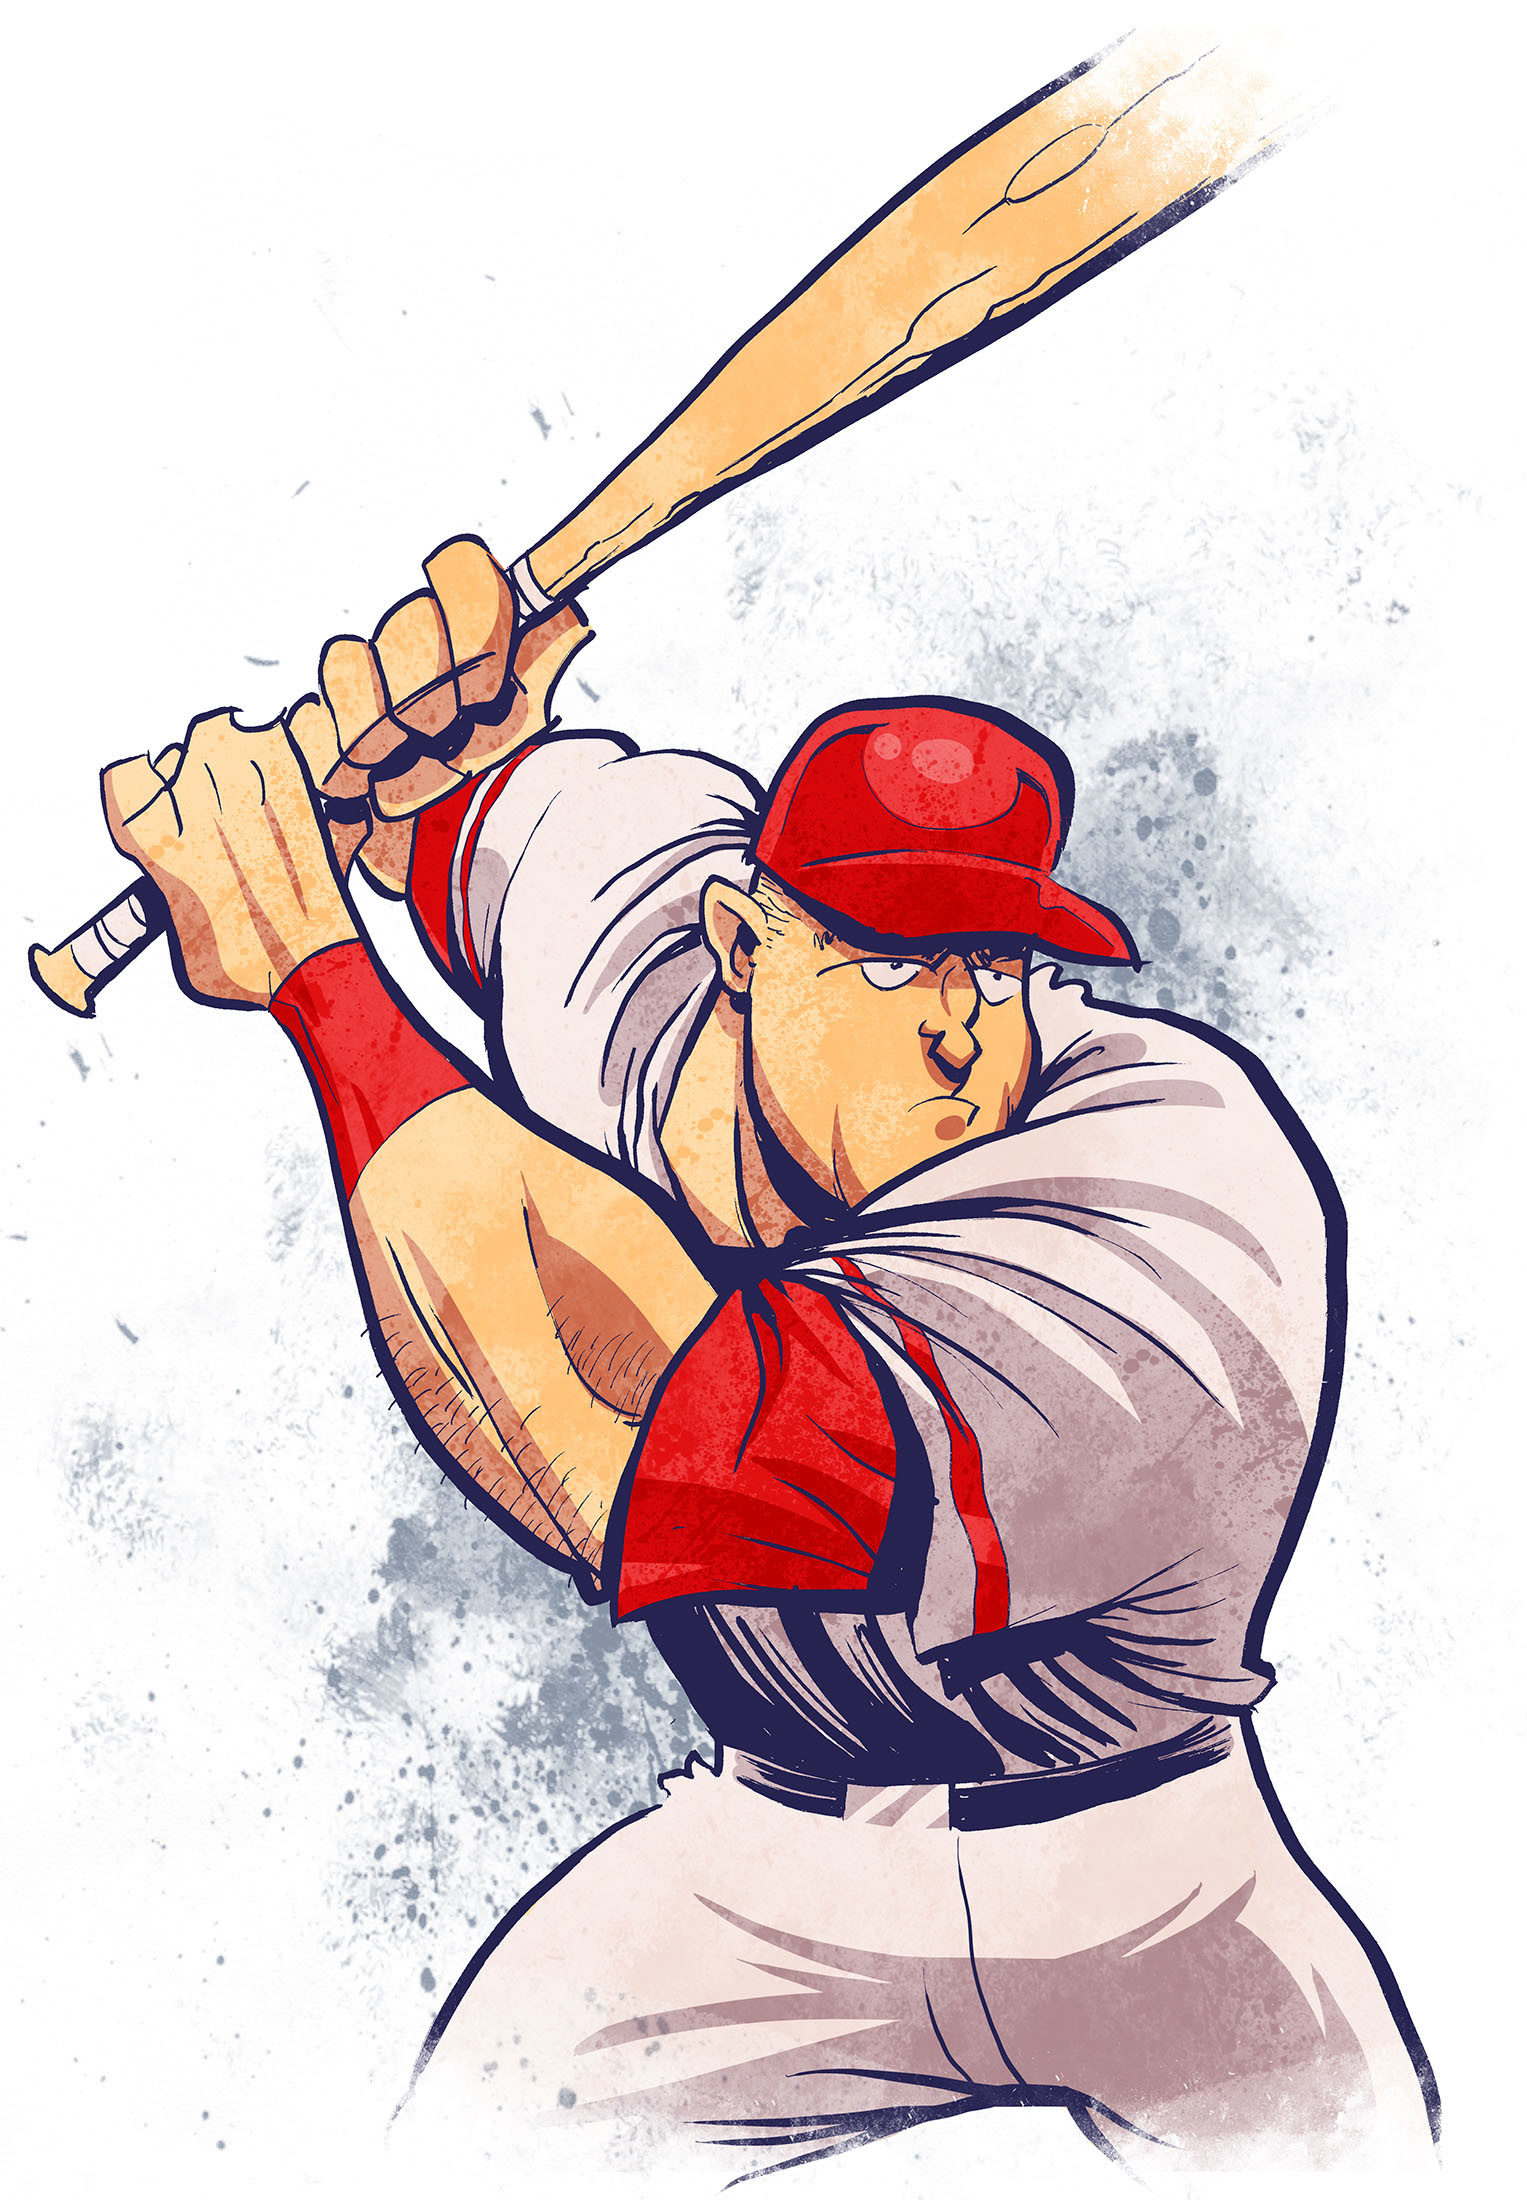 Mike Trout Illustration